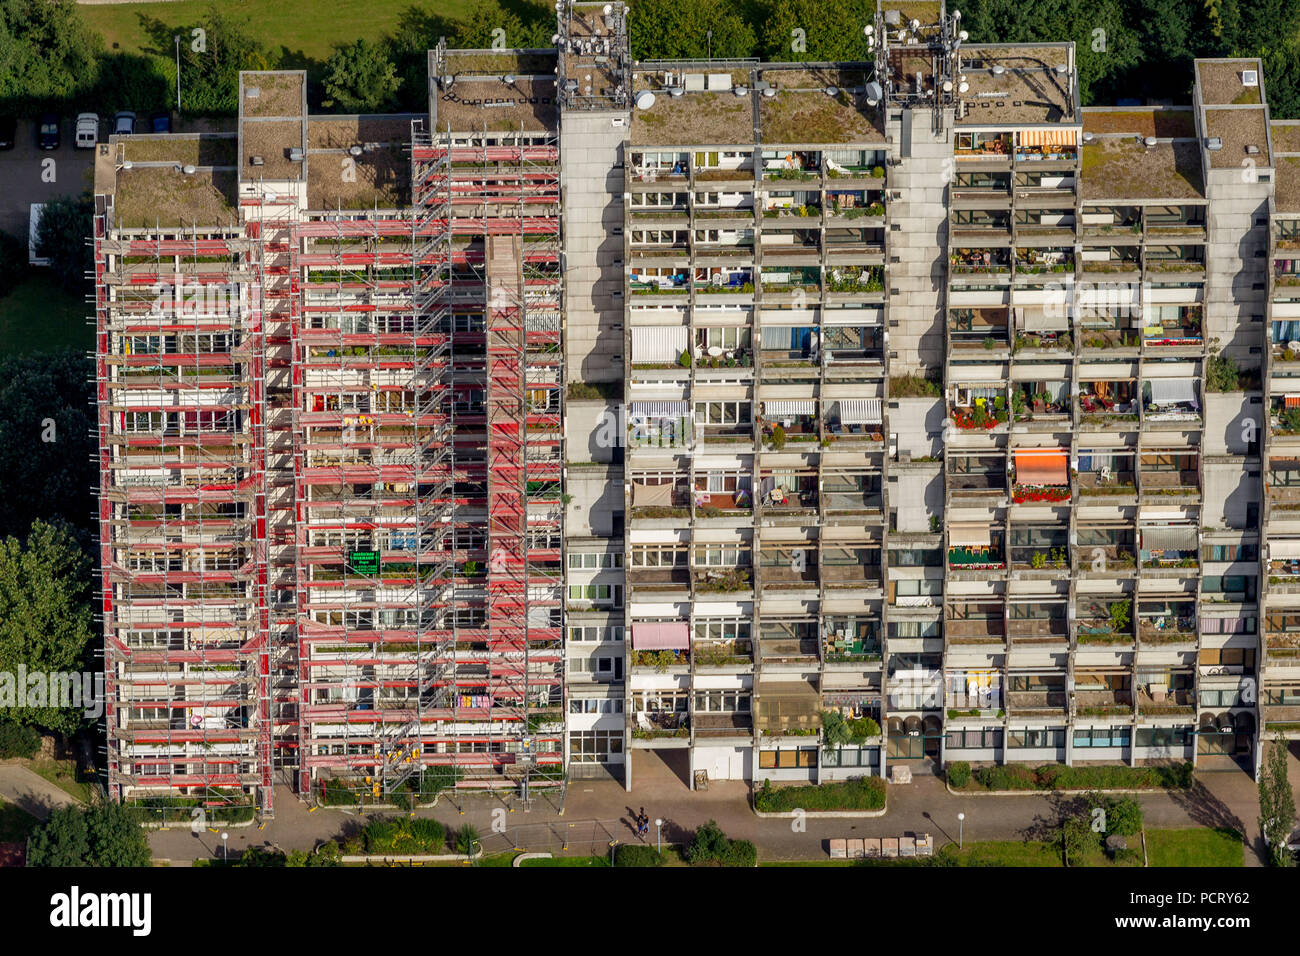 Aerial view, Restoration of the Hannibal Hochhaus Dorstfeld, Tenement house, socially troubled area, Concrete construction, high-rise tenement, Dortmund, Ruhr area, North Rhine-Westphalia, Germany, Europe, Stock Photo